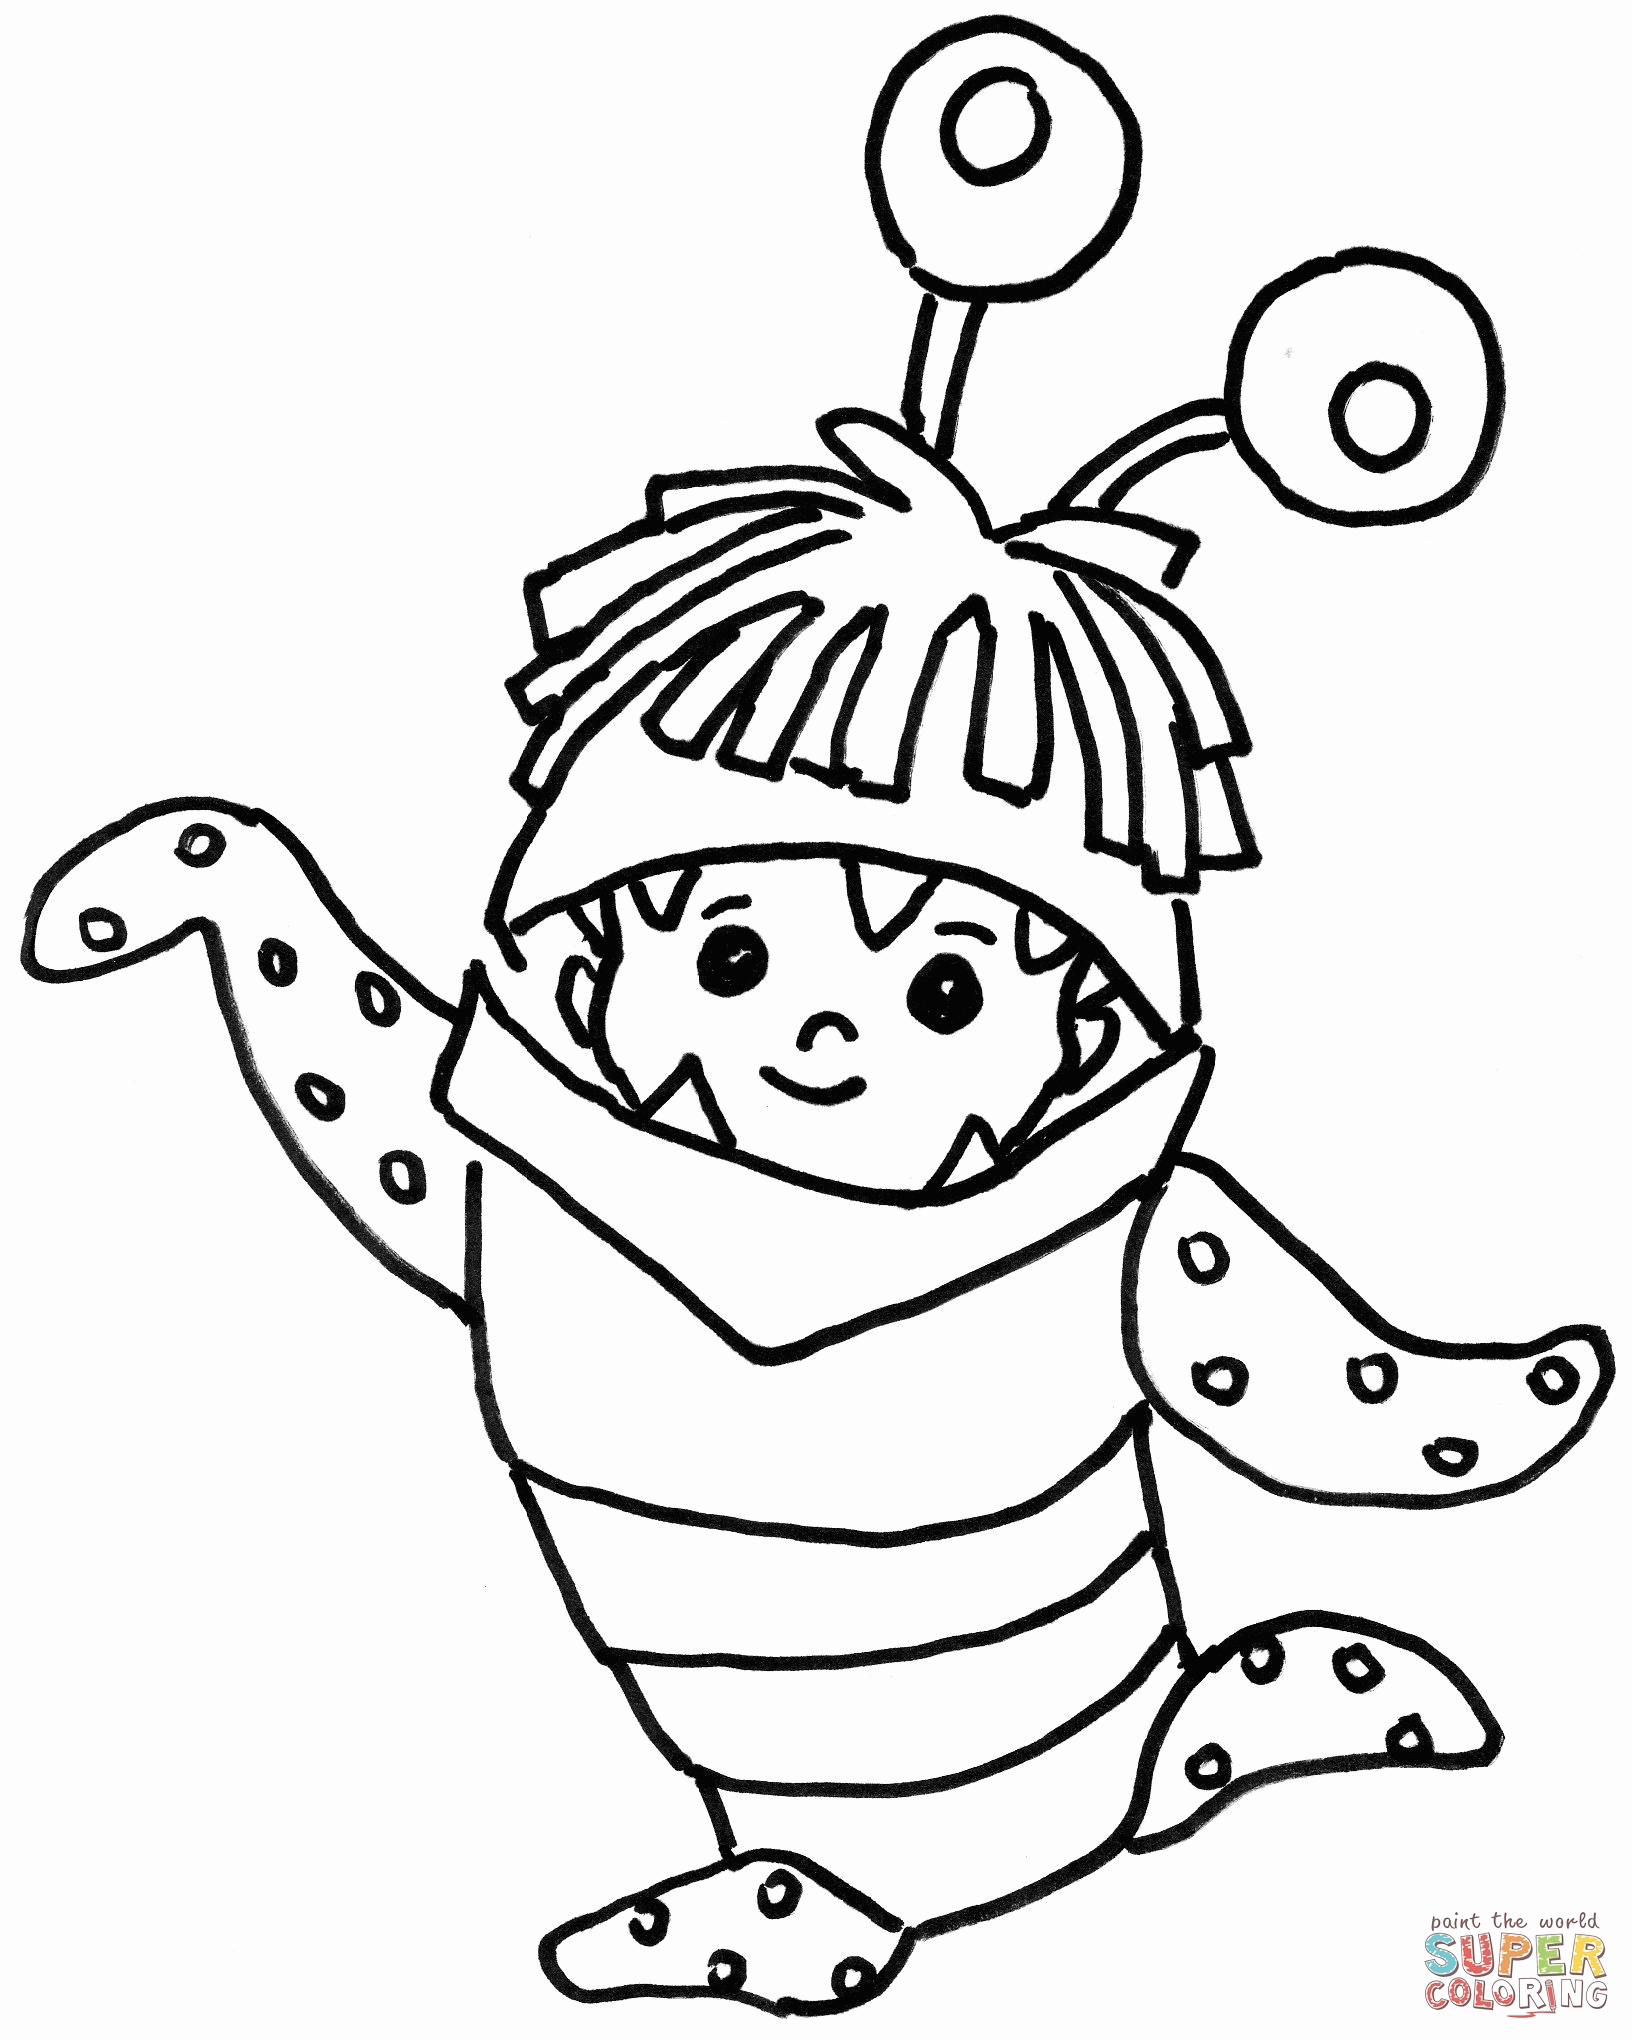 boo monsters inc coloring page - Clip Art Library